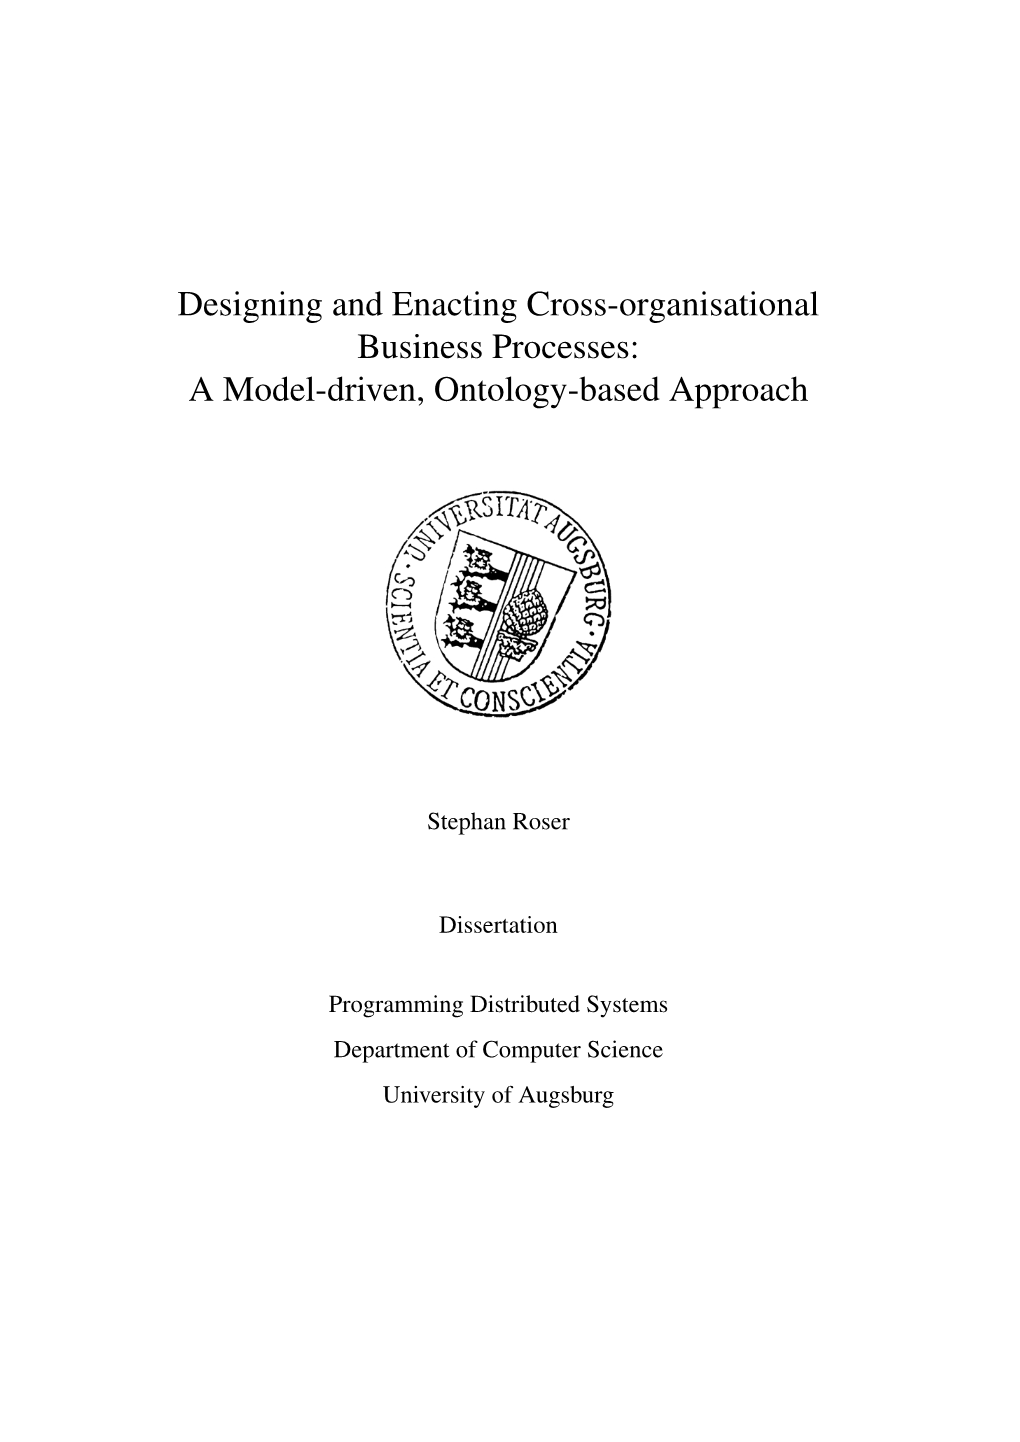 Designing and Enacting Cross-Organisational Business Processes: a Model-Driven, Ontology-Based Approach